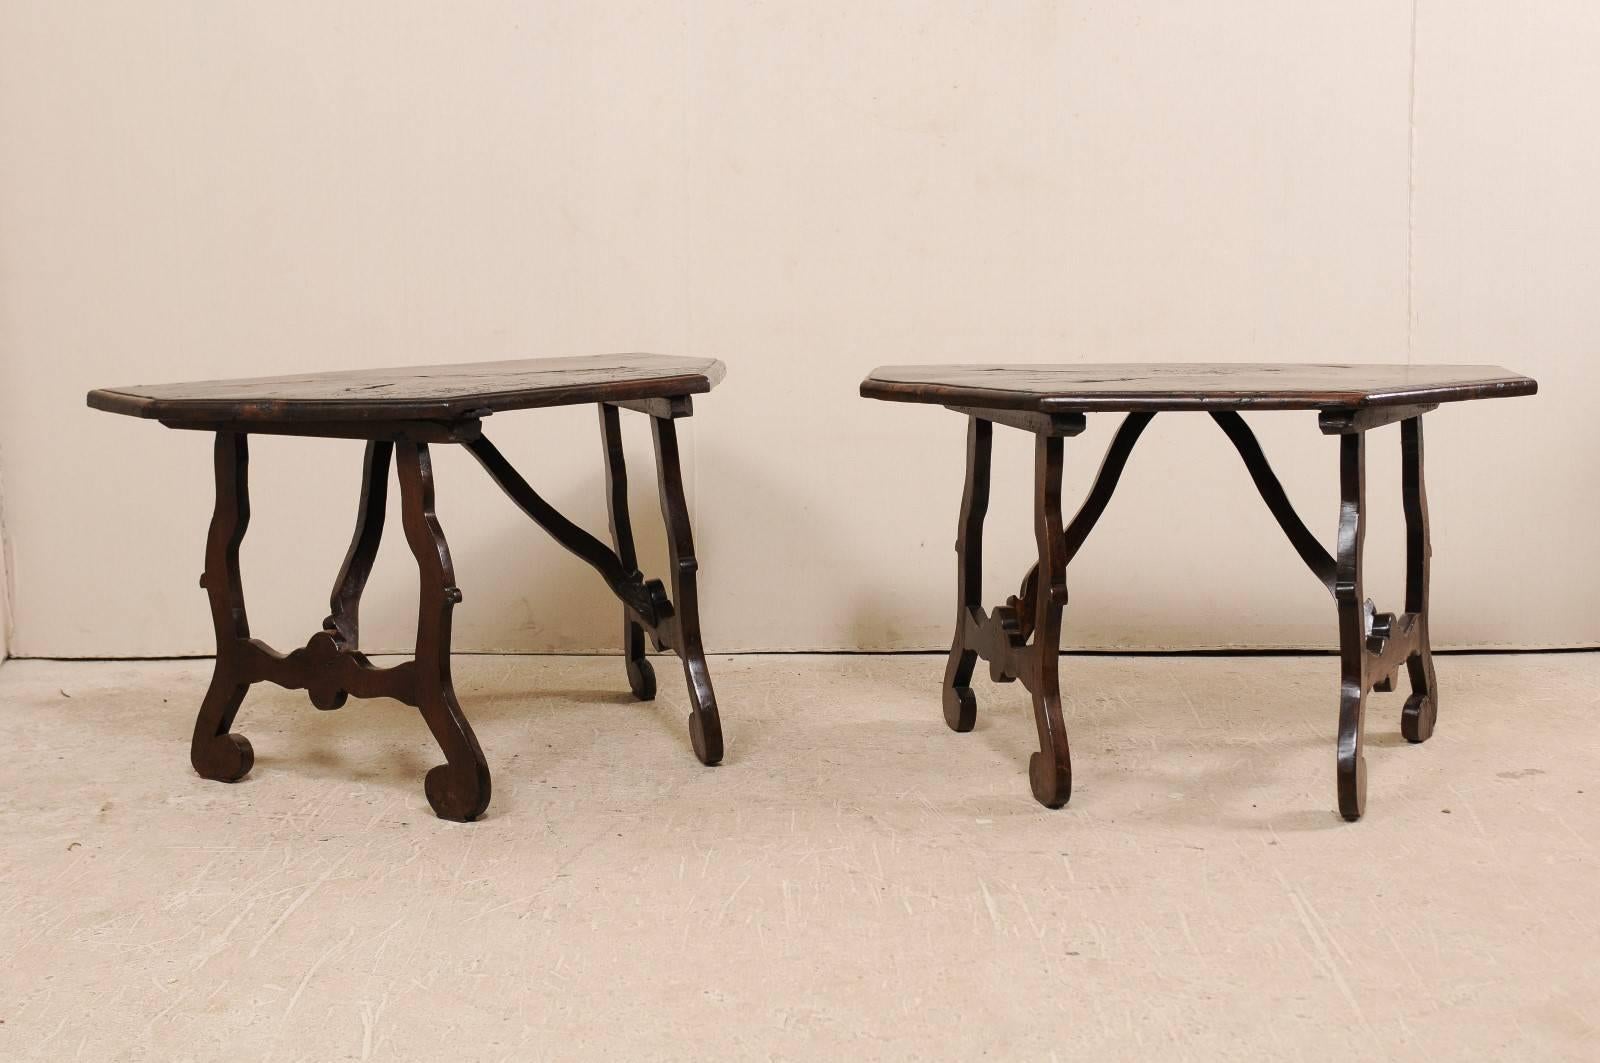 A pair of 18th century Italian demilune tables. This uniquely shaped pair of antique Italian walnut demilune tables each feature half octagon shaped tops, supported by an inwardly set trestle style base. The carved trestle supports have fluid